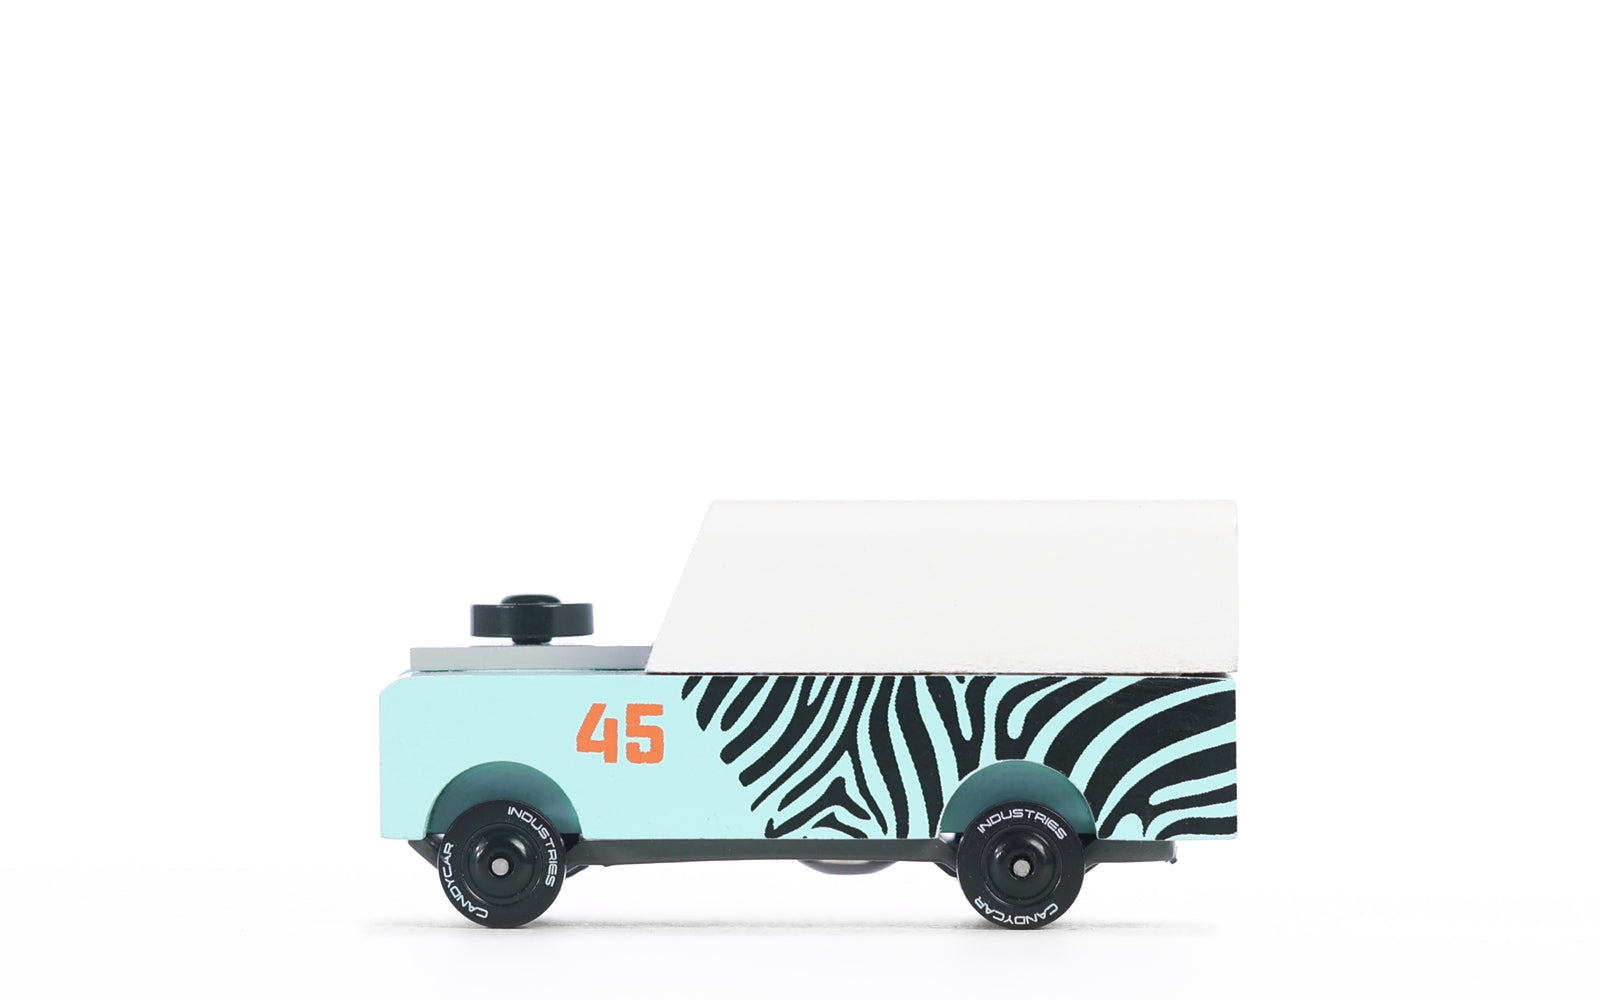 Mini Zebra Drifter toy car by Candylab Toys features solid beech wood and water-based paints. Made sustainably, made to last, made for fun.   Wood, soy inks, water-based paints, degradable rubber, and metal parts are all part of Candylab's old school way of making toys, with a modern design twist.